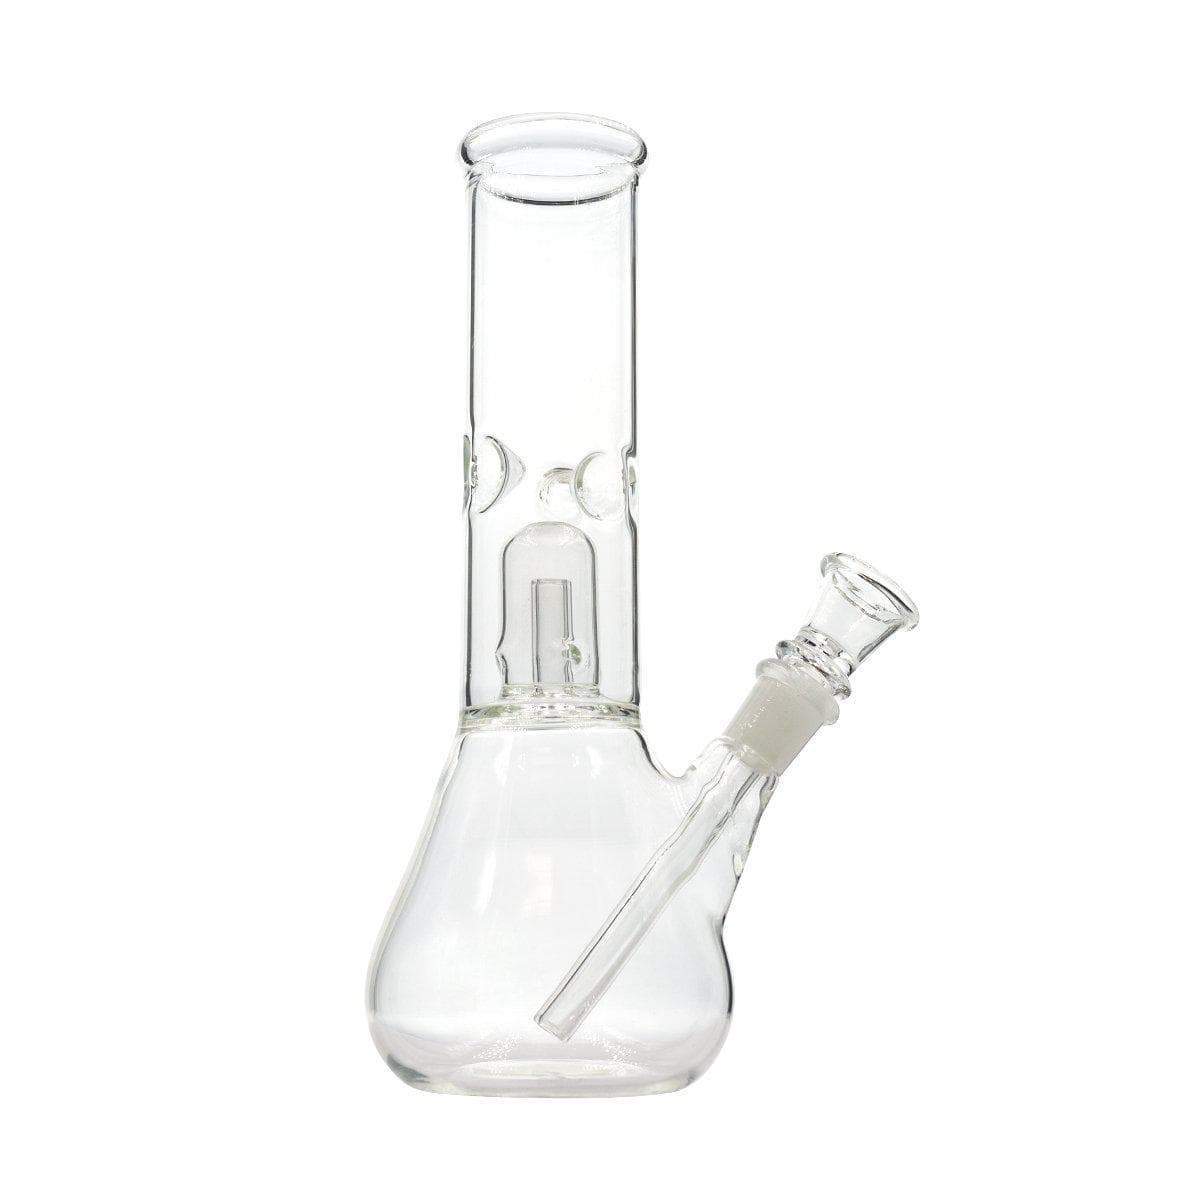 Transparent glass bong with internal percolator and ice catacher, downstem and bowl